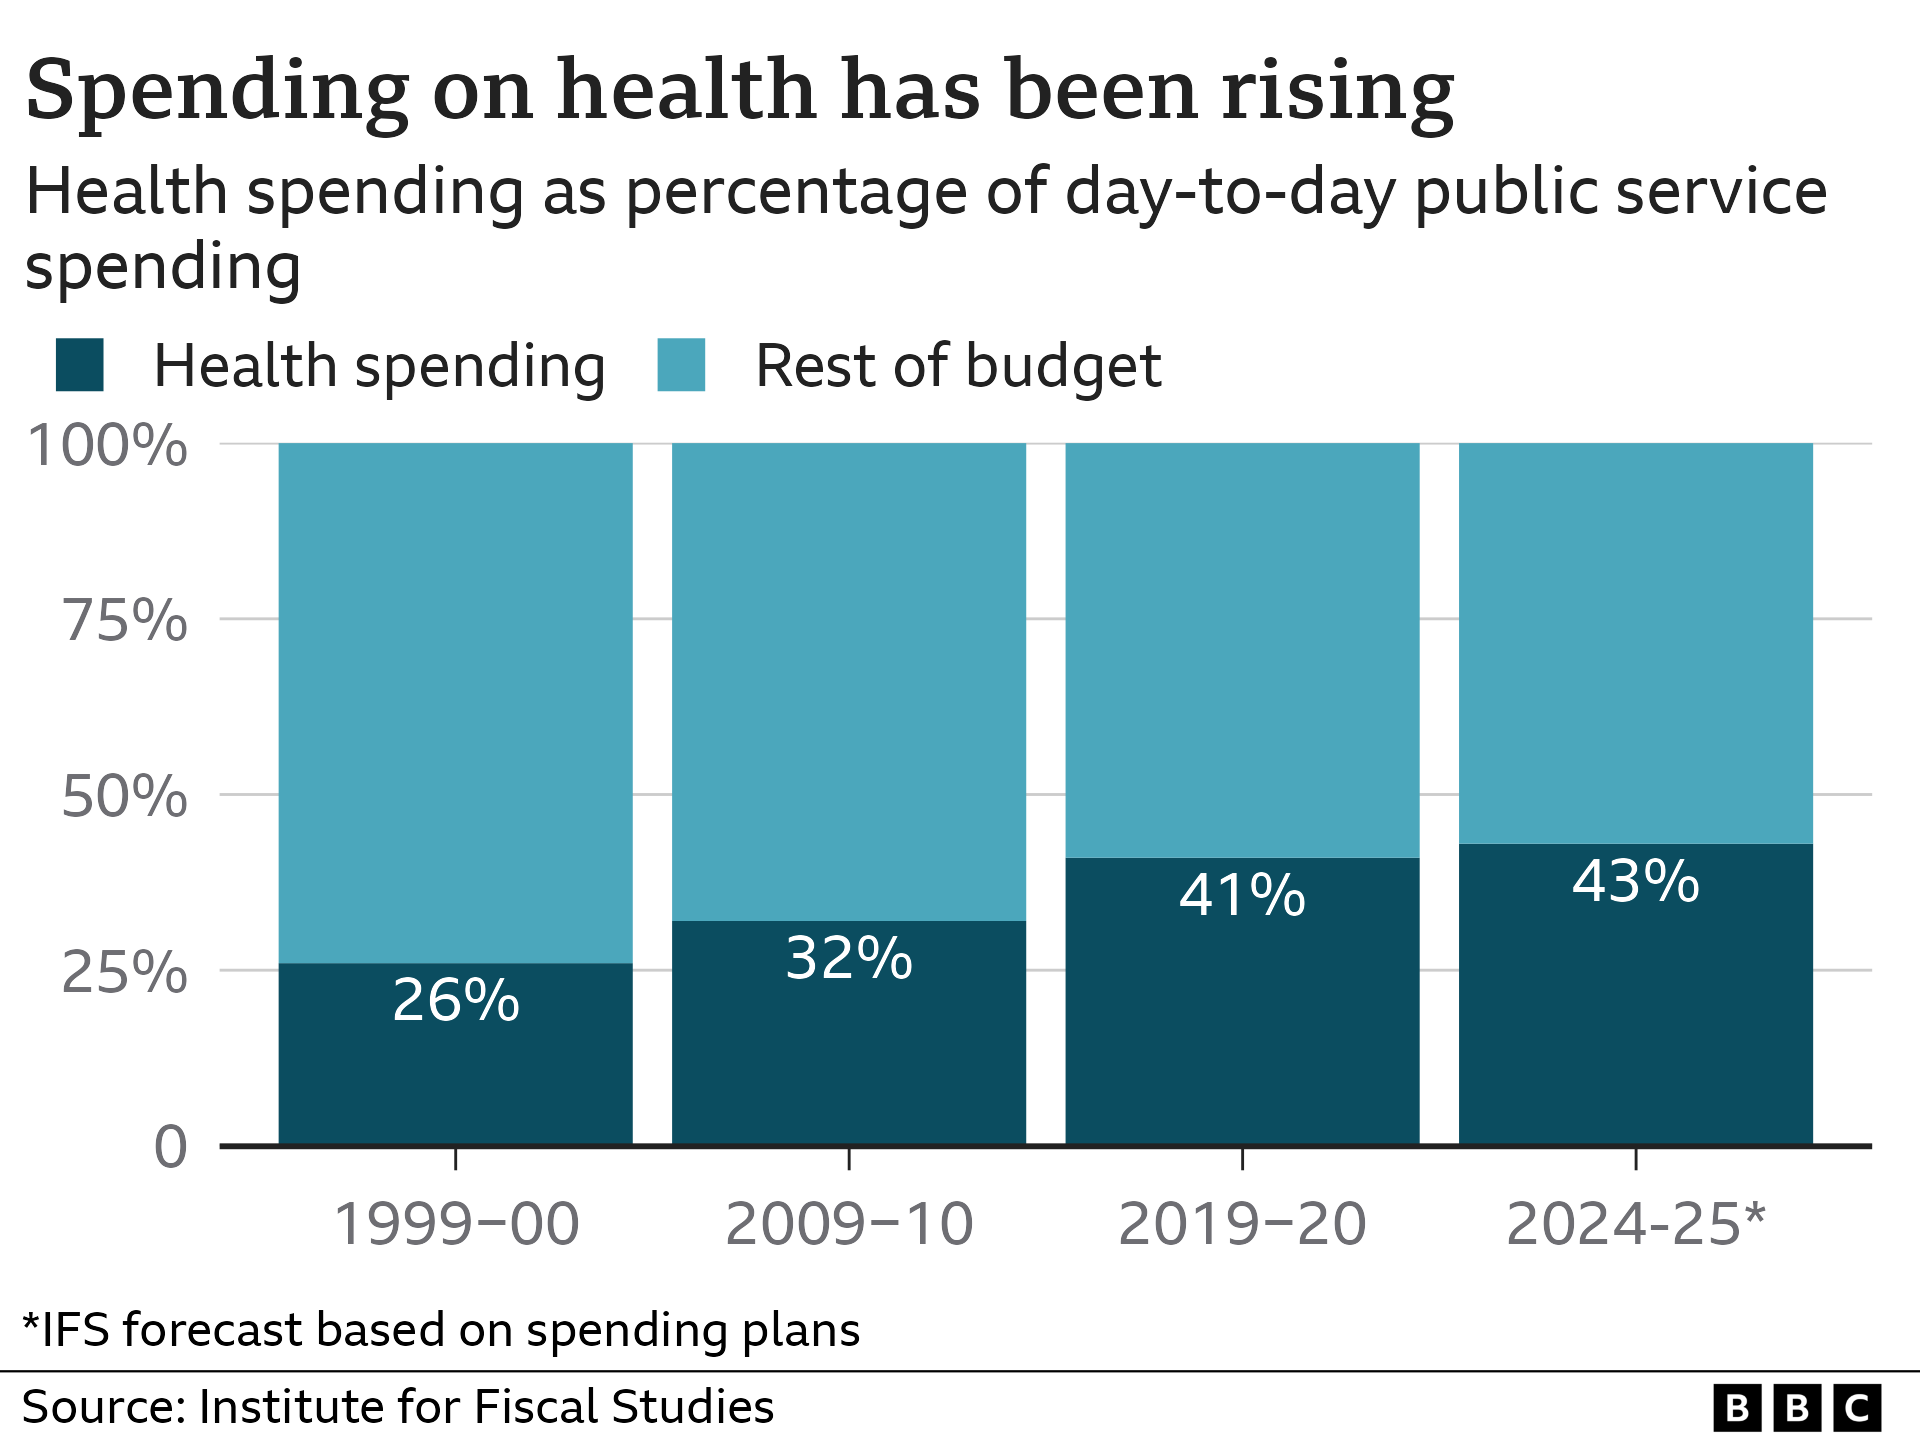 Bar chart showing spending on health rising as a percentage of day-to-day public service spending. It rises from 26% in 1999-200 to 43% in 2024-25. Source: Institute for Fiscal Studies.